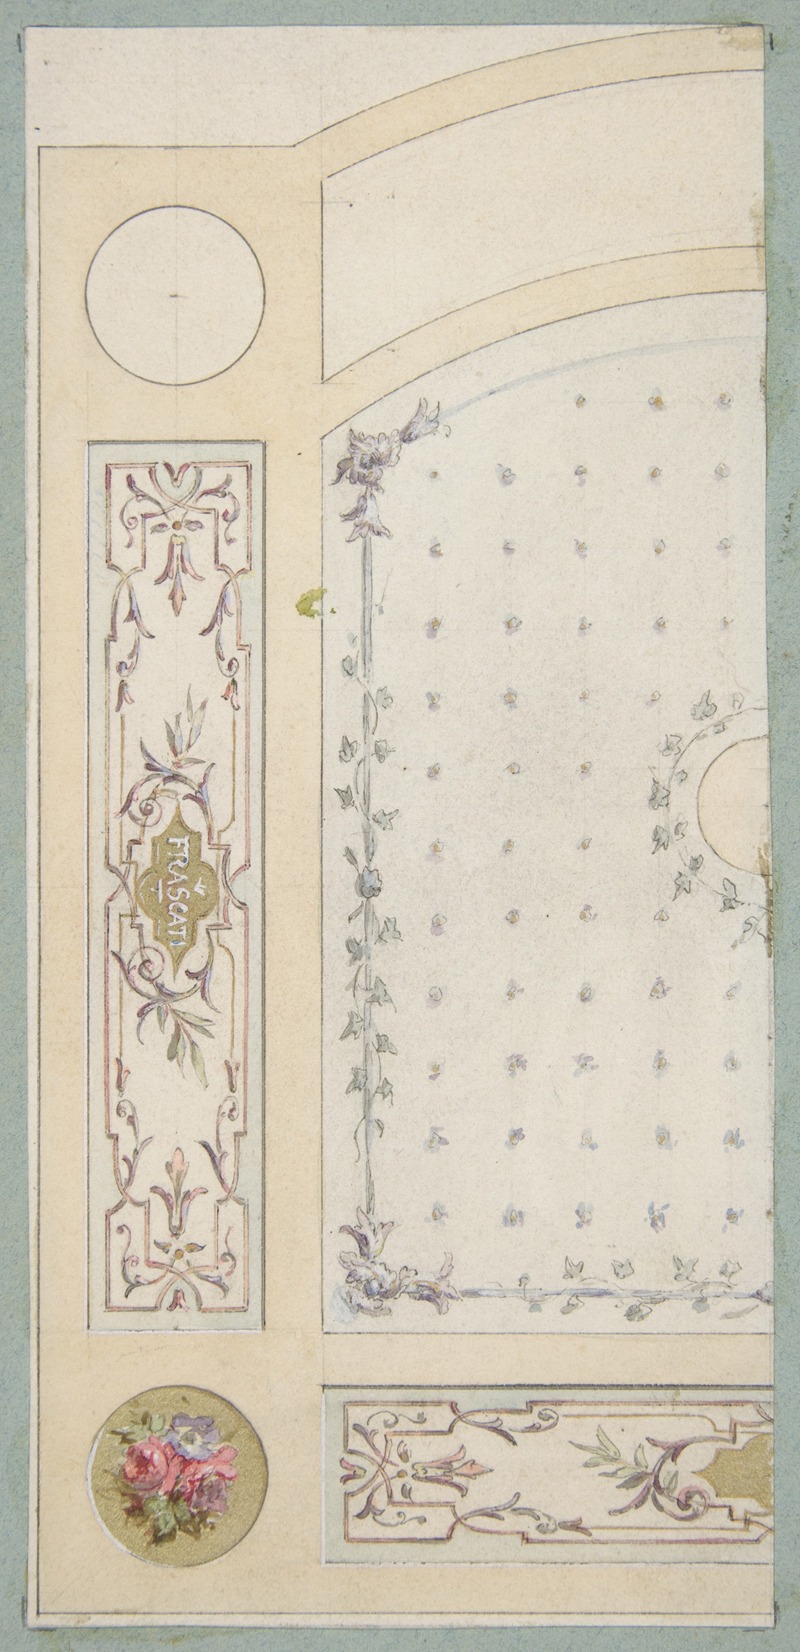 Jules-Edmond-Charles Lachaise - Design for painted decoration of wall or ceiling panels, including the word ‘Frascati’